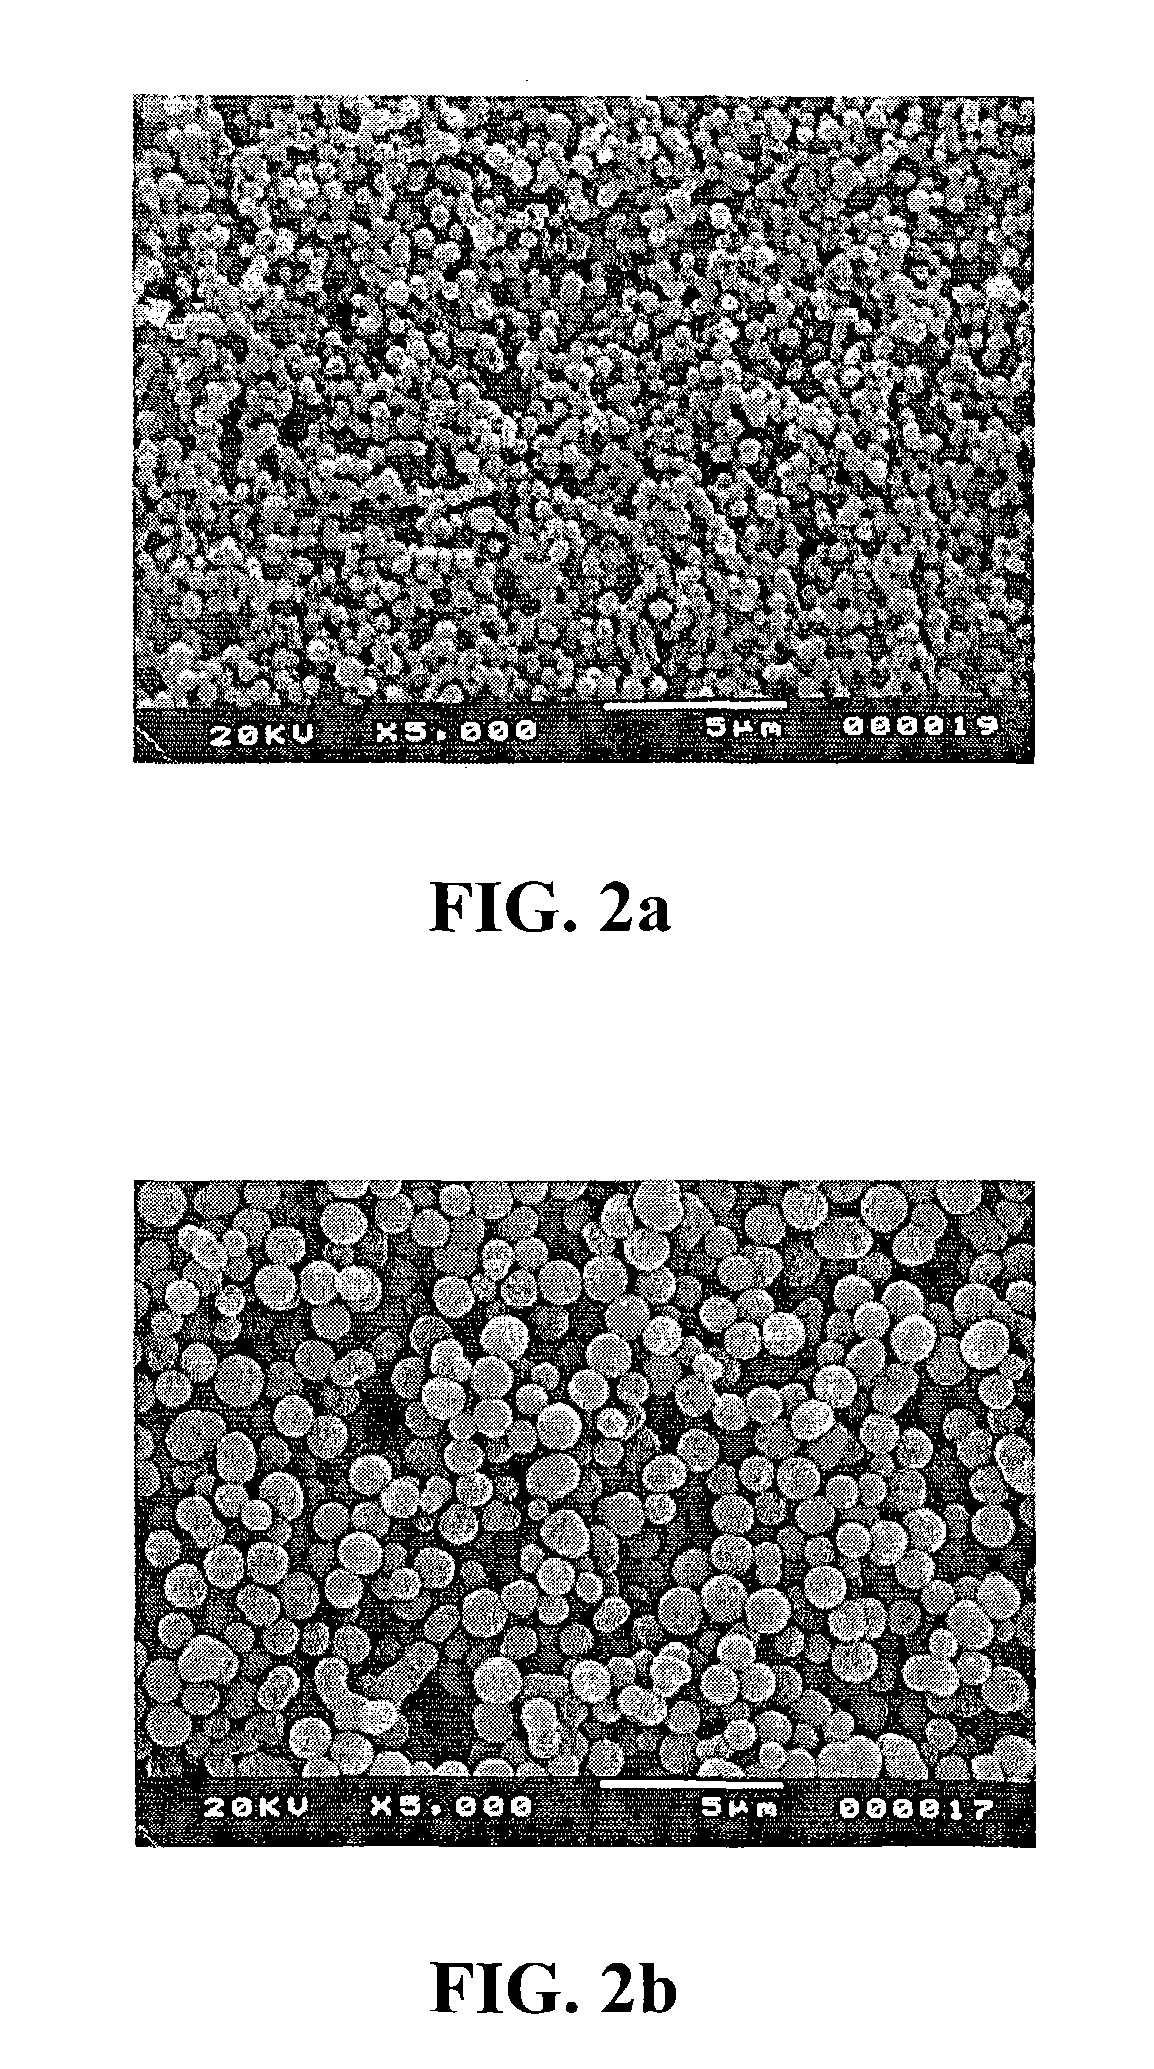 Method for making fine and ultrafine spherical particles of zirconium titanate and other mixed metal oxide systems